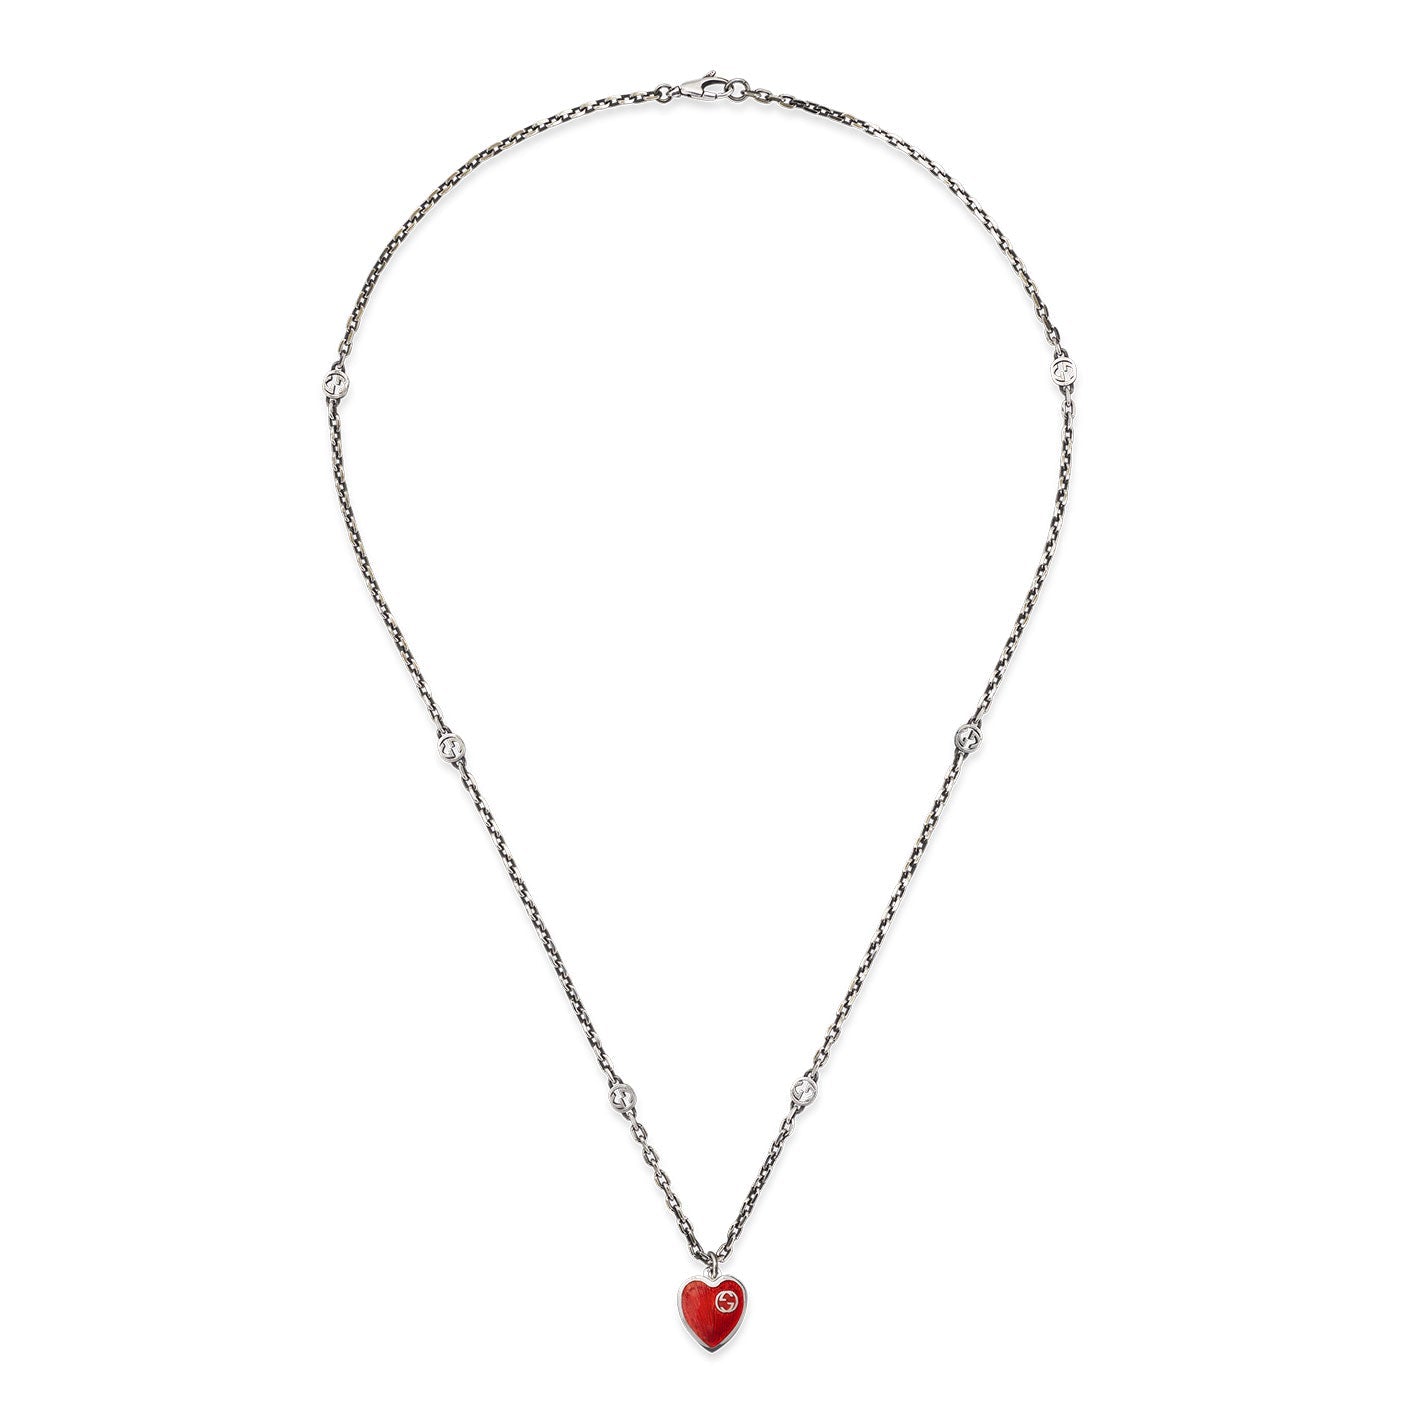 Gucci Interlocking G Sterling Steel Necklace with Red Enamel Heart Pendant